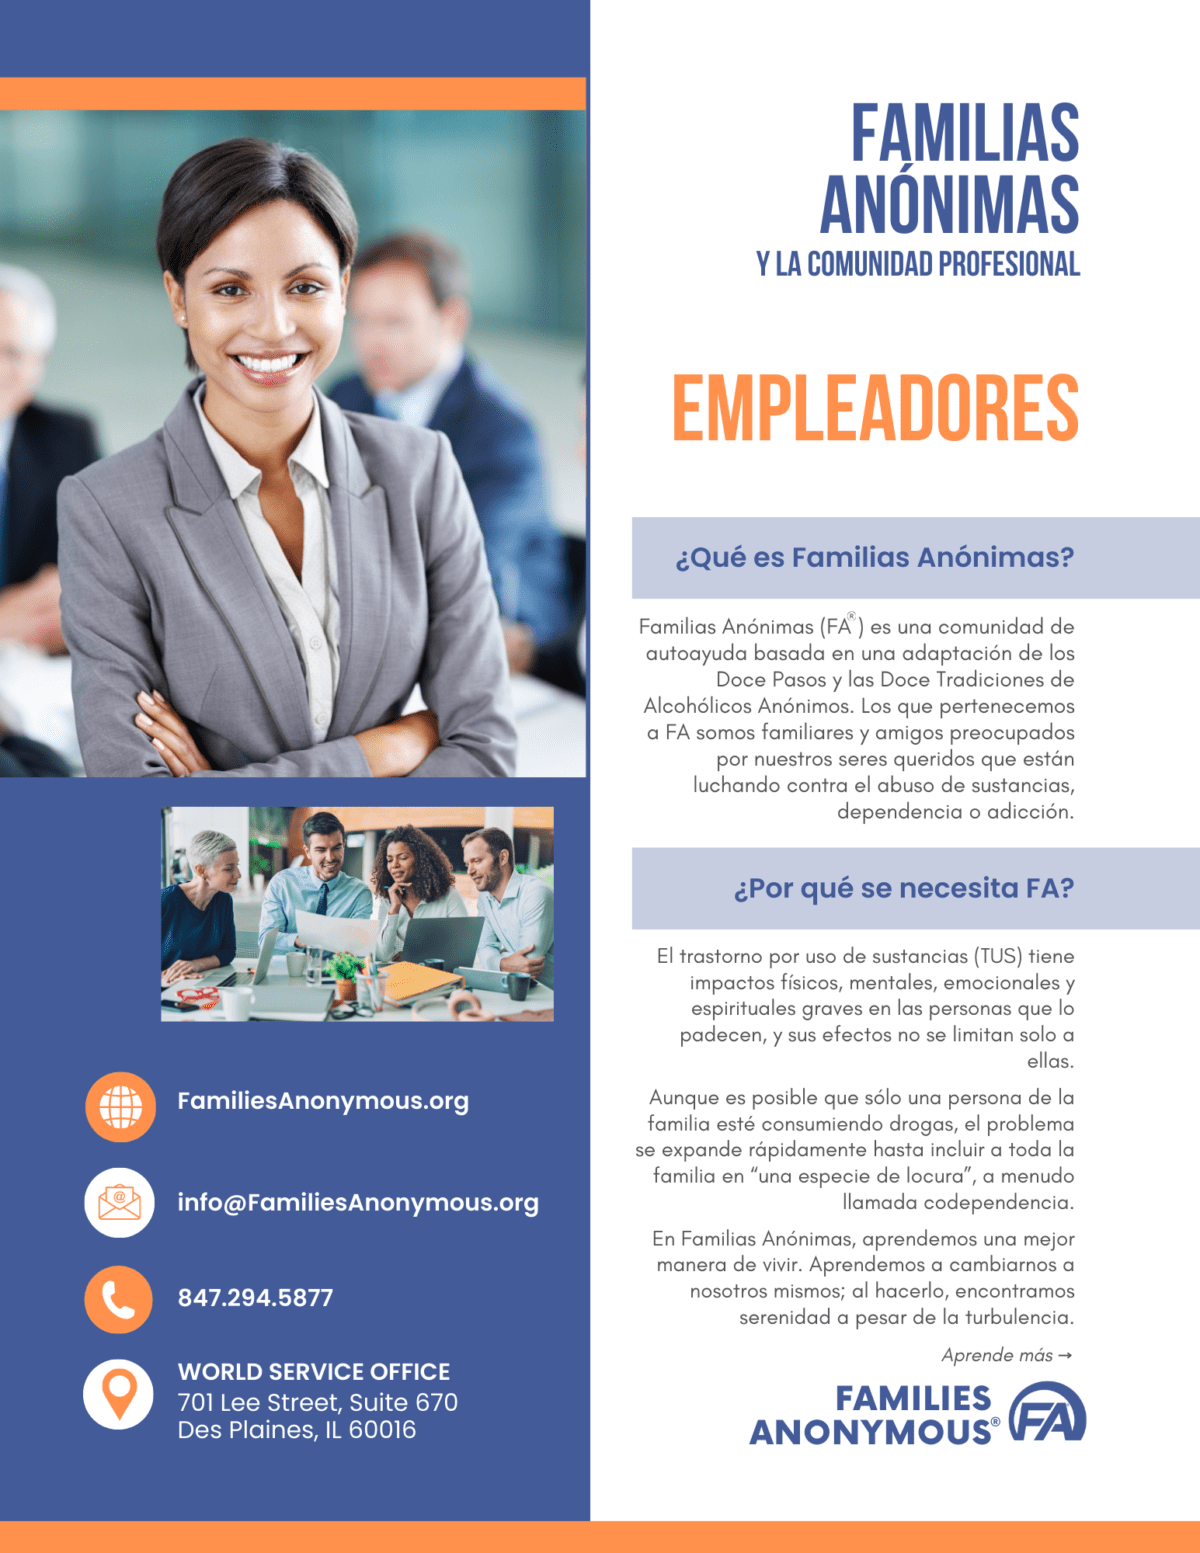 Families Anonymous and the Professional Community – Employers – SPANISH